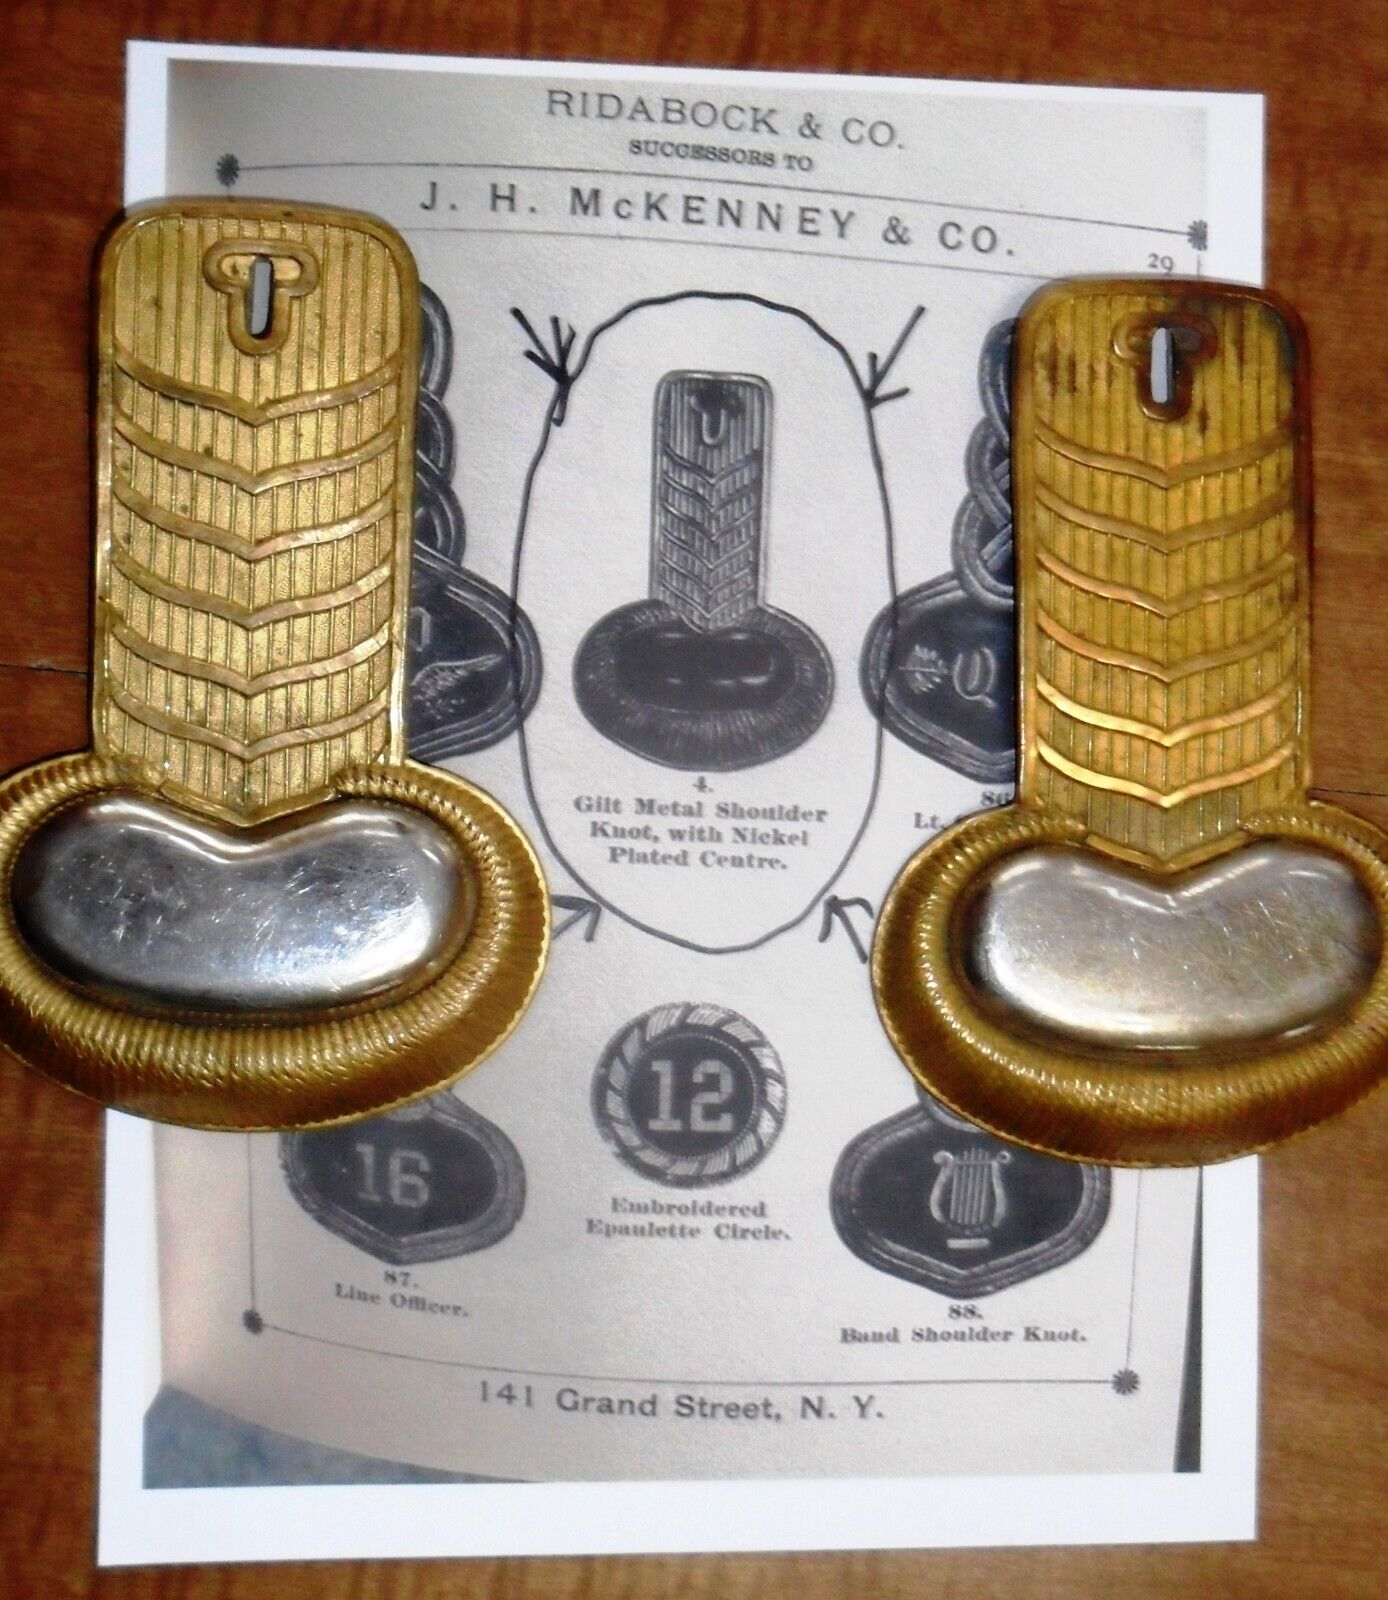 RARE US ARMY OFFICER KNOTS OR SCALES AS SEEN IN 1880s RIDABOCK CATALOG